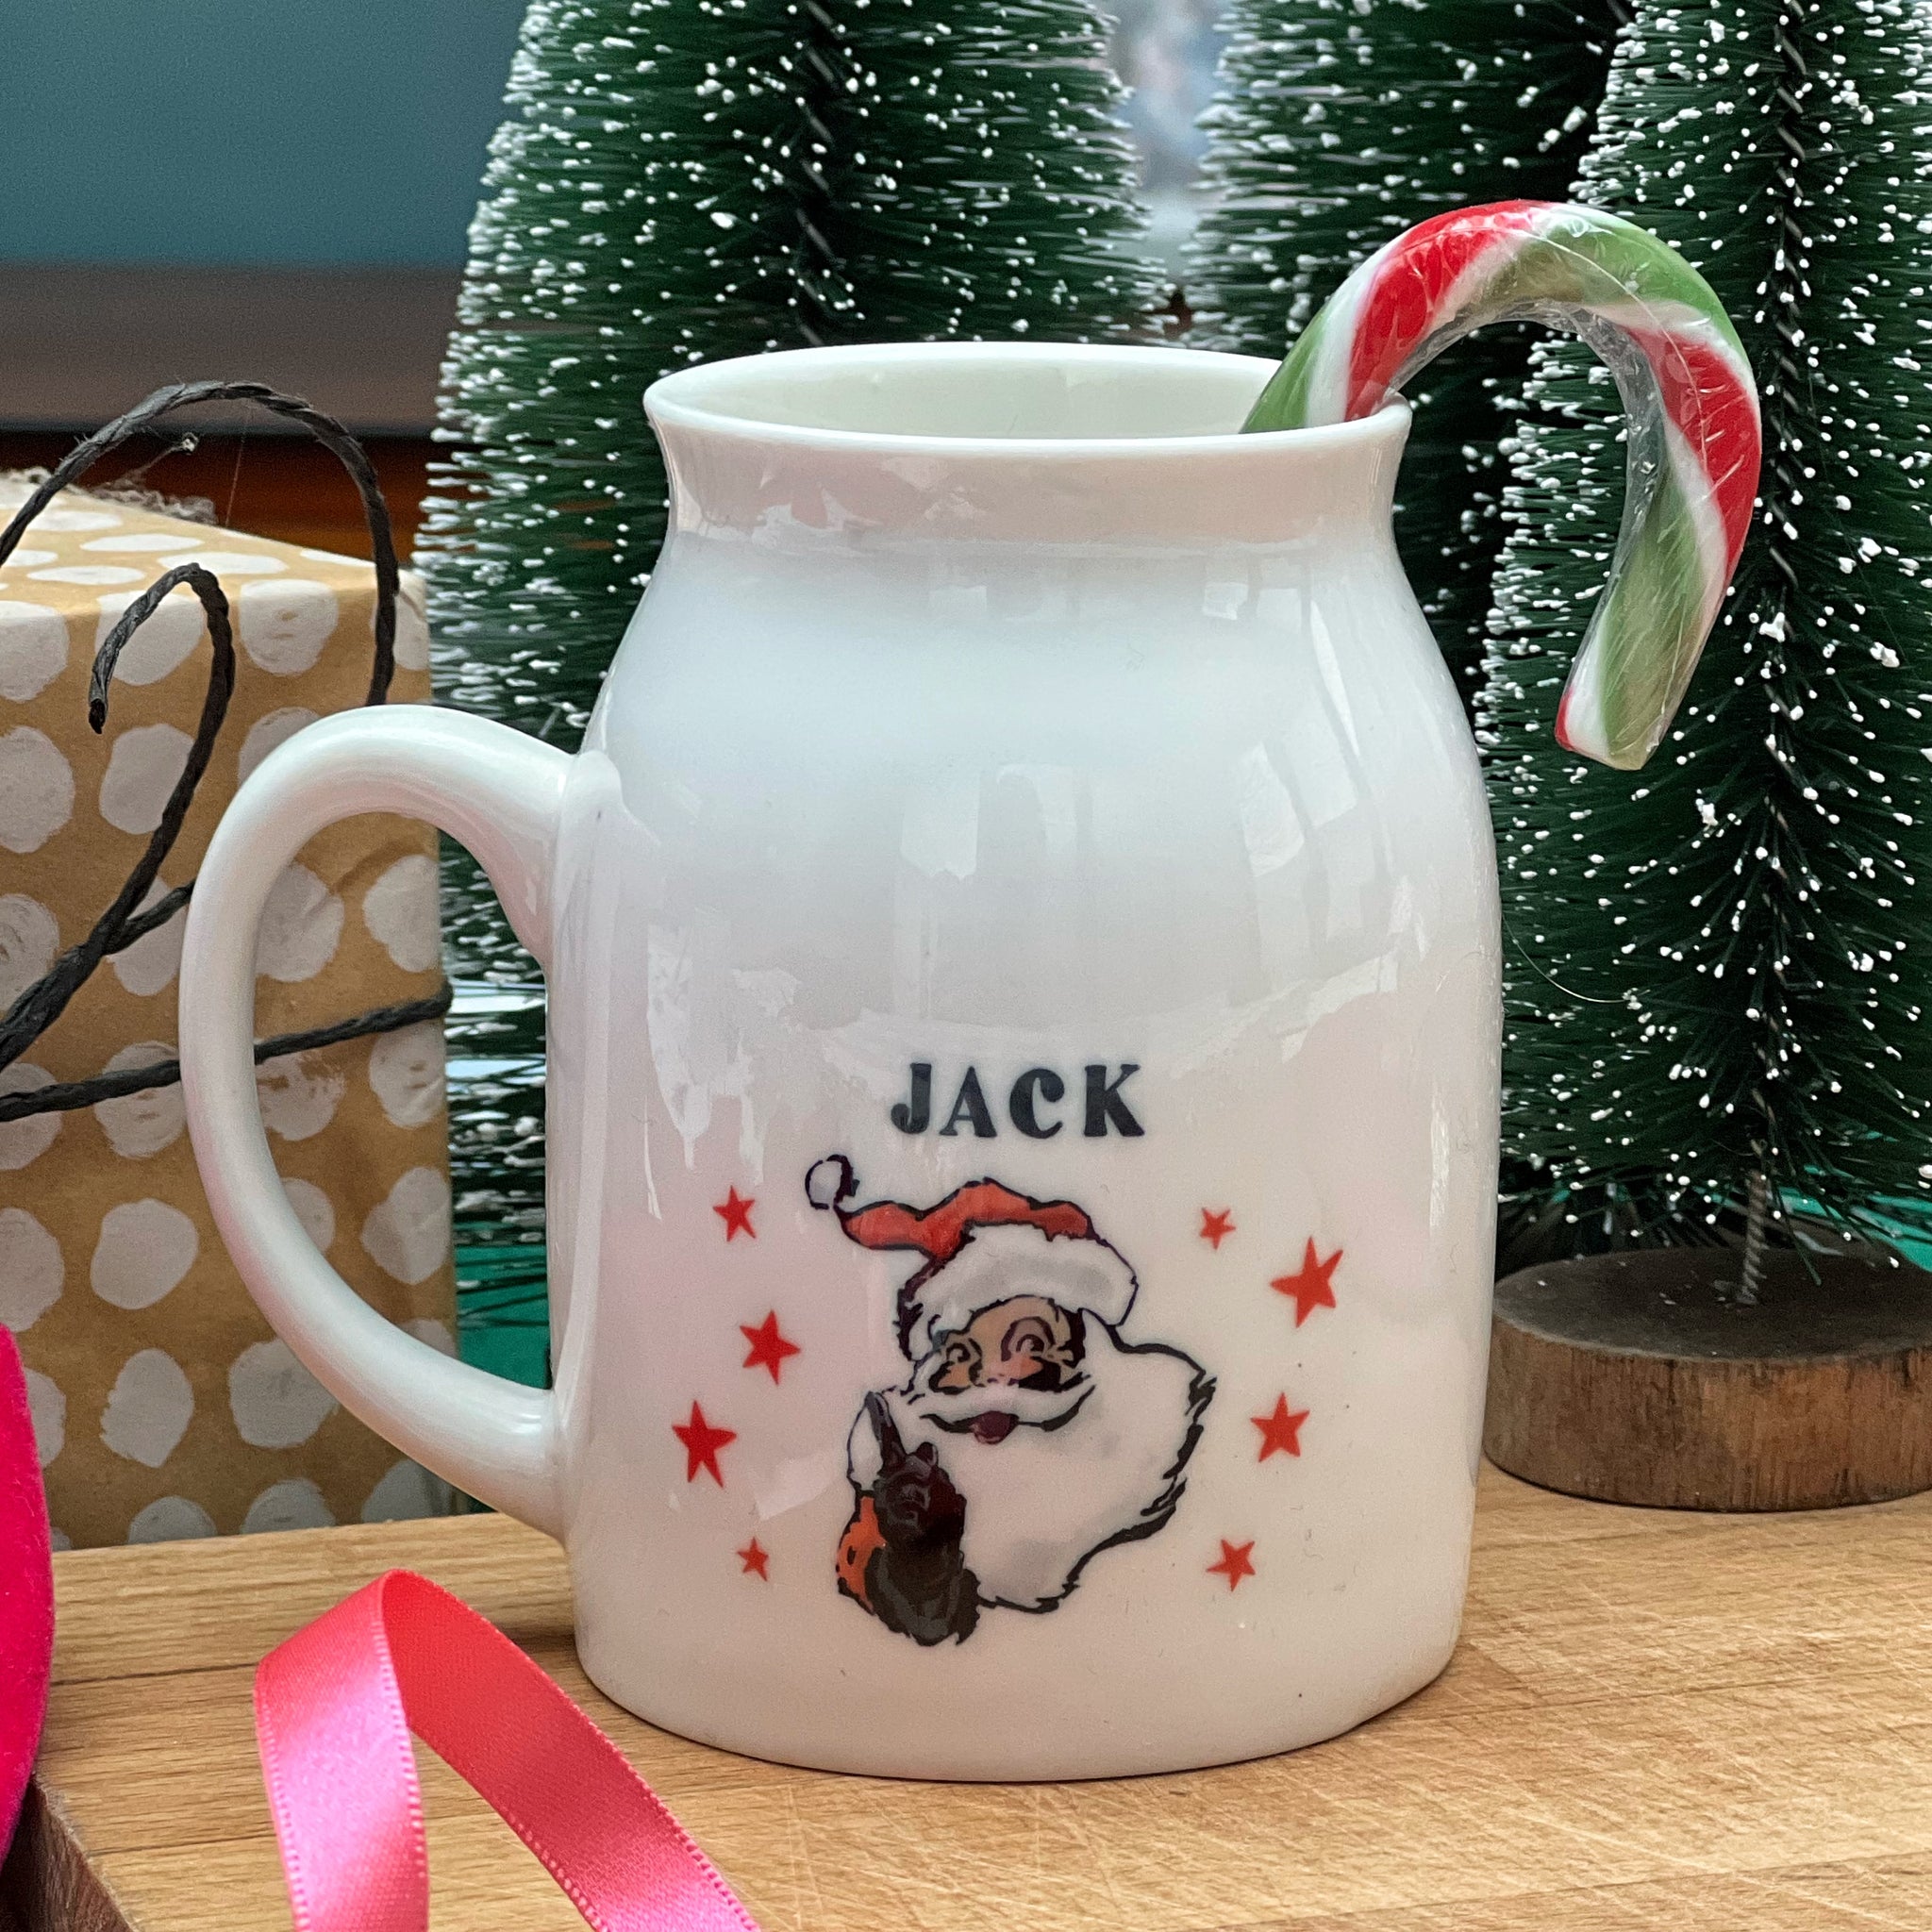  Personalized Christmas Mugs with Names - Bear Hot Chocolate  Cups for Kids, Personalized with Kids Name Child's Mug Customized  Dishwasher Safe Mug : Home & Kitchen